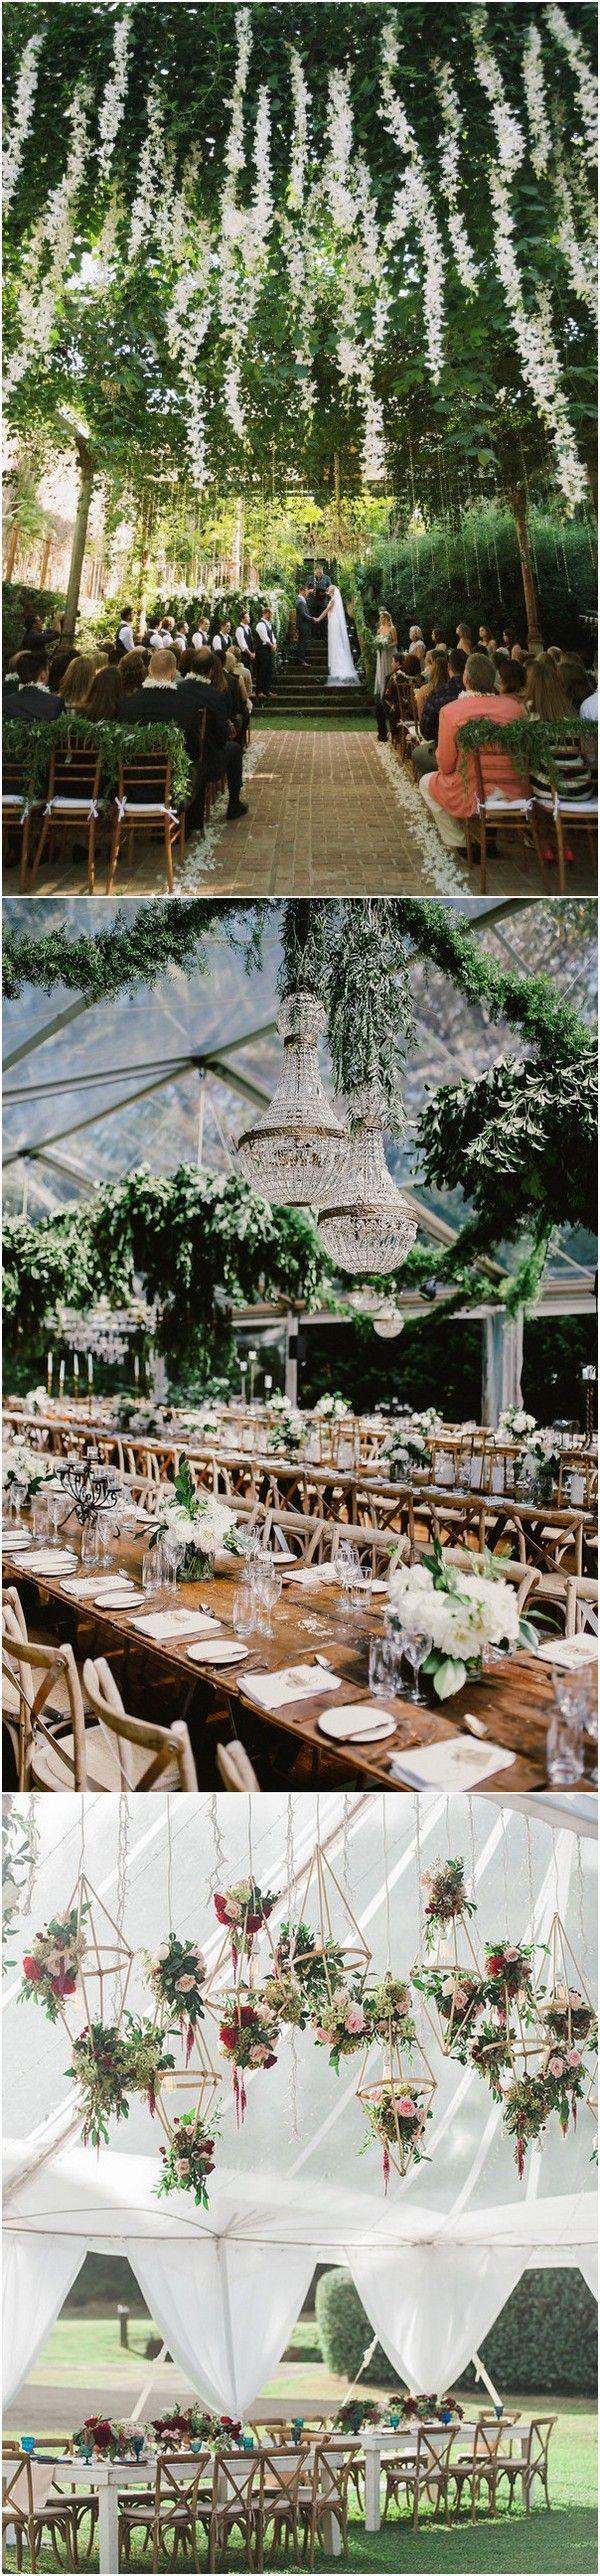 Wedding - Trending-12 Fairytale Wedding Flower Ceiling Ideas For Your Big Day - Page 2 Of 2